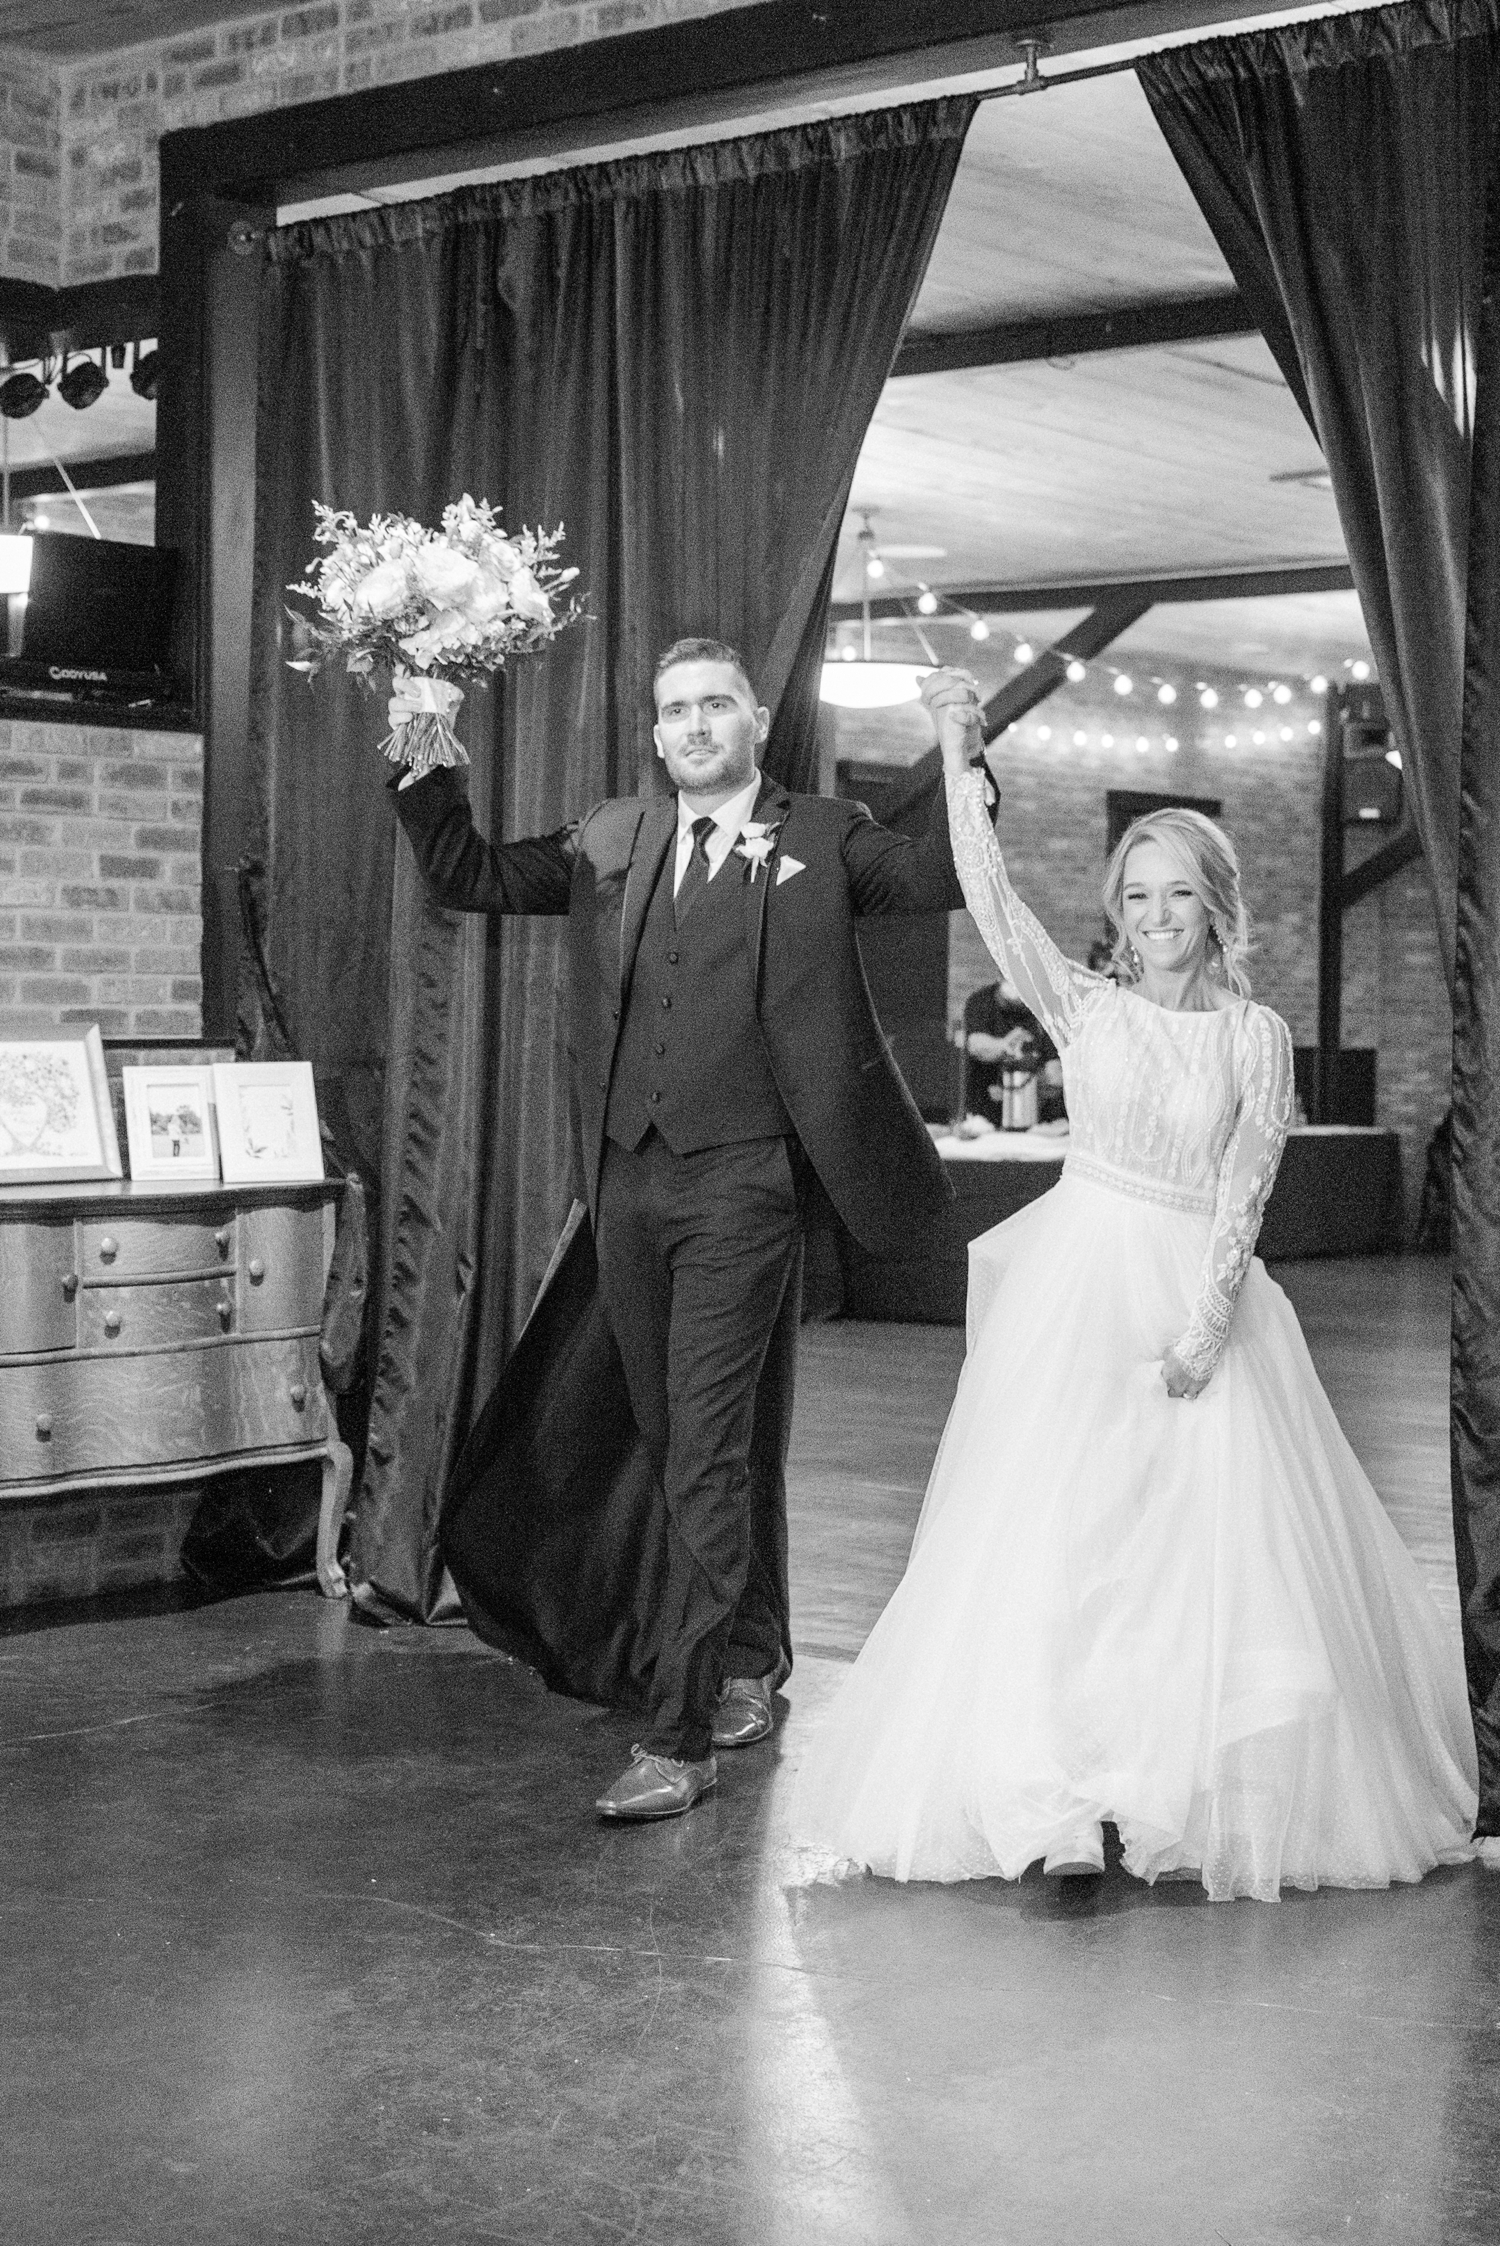 Indiana Wedding Best of Sparkler Send Off Pictures, Wedding Reception Ideas, Wedding Reception Decorations and Wedding Reception Centerpieces by Rose Courts Photography